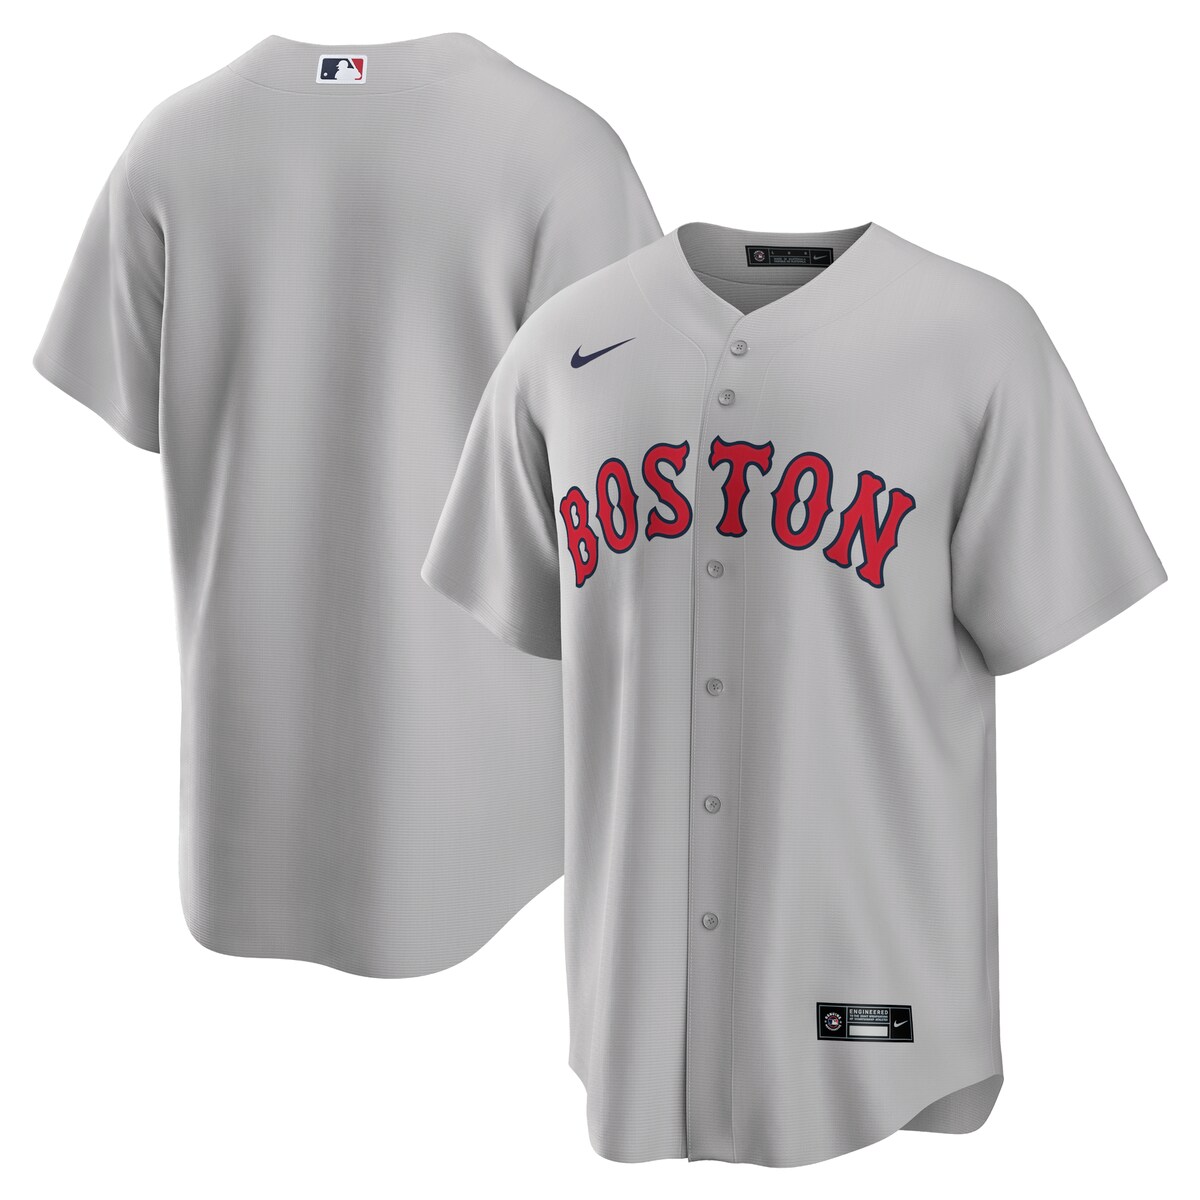 As the ultimate Boston Red Sox fan, you deserve the same look that your favorite players sport out on the field. This Road Replica Team jersey from Nike brings the team's official design to your wardrobe for a consistently spirited look on game day. The polyester material and slick Boston Red Sox graphics are just what any fan needs to look and feel their best.ImportedOfficially licensedBrand: NikeMachine wash gentle or dry clean. Tumble dry low, hang dry preferred.Rounded hemFull-button frontShort sleeveHeat-sealed jock tagMLB Batterman applique on center back neckHeat-sealed transfer appliqueSizing Tip: Product runs large. We recommend ordering one size smaller than you normally wear.Material: 100% Polyester